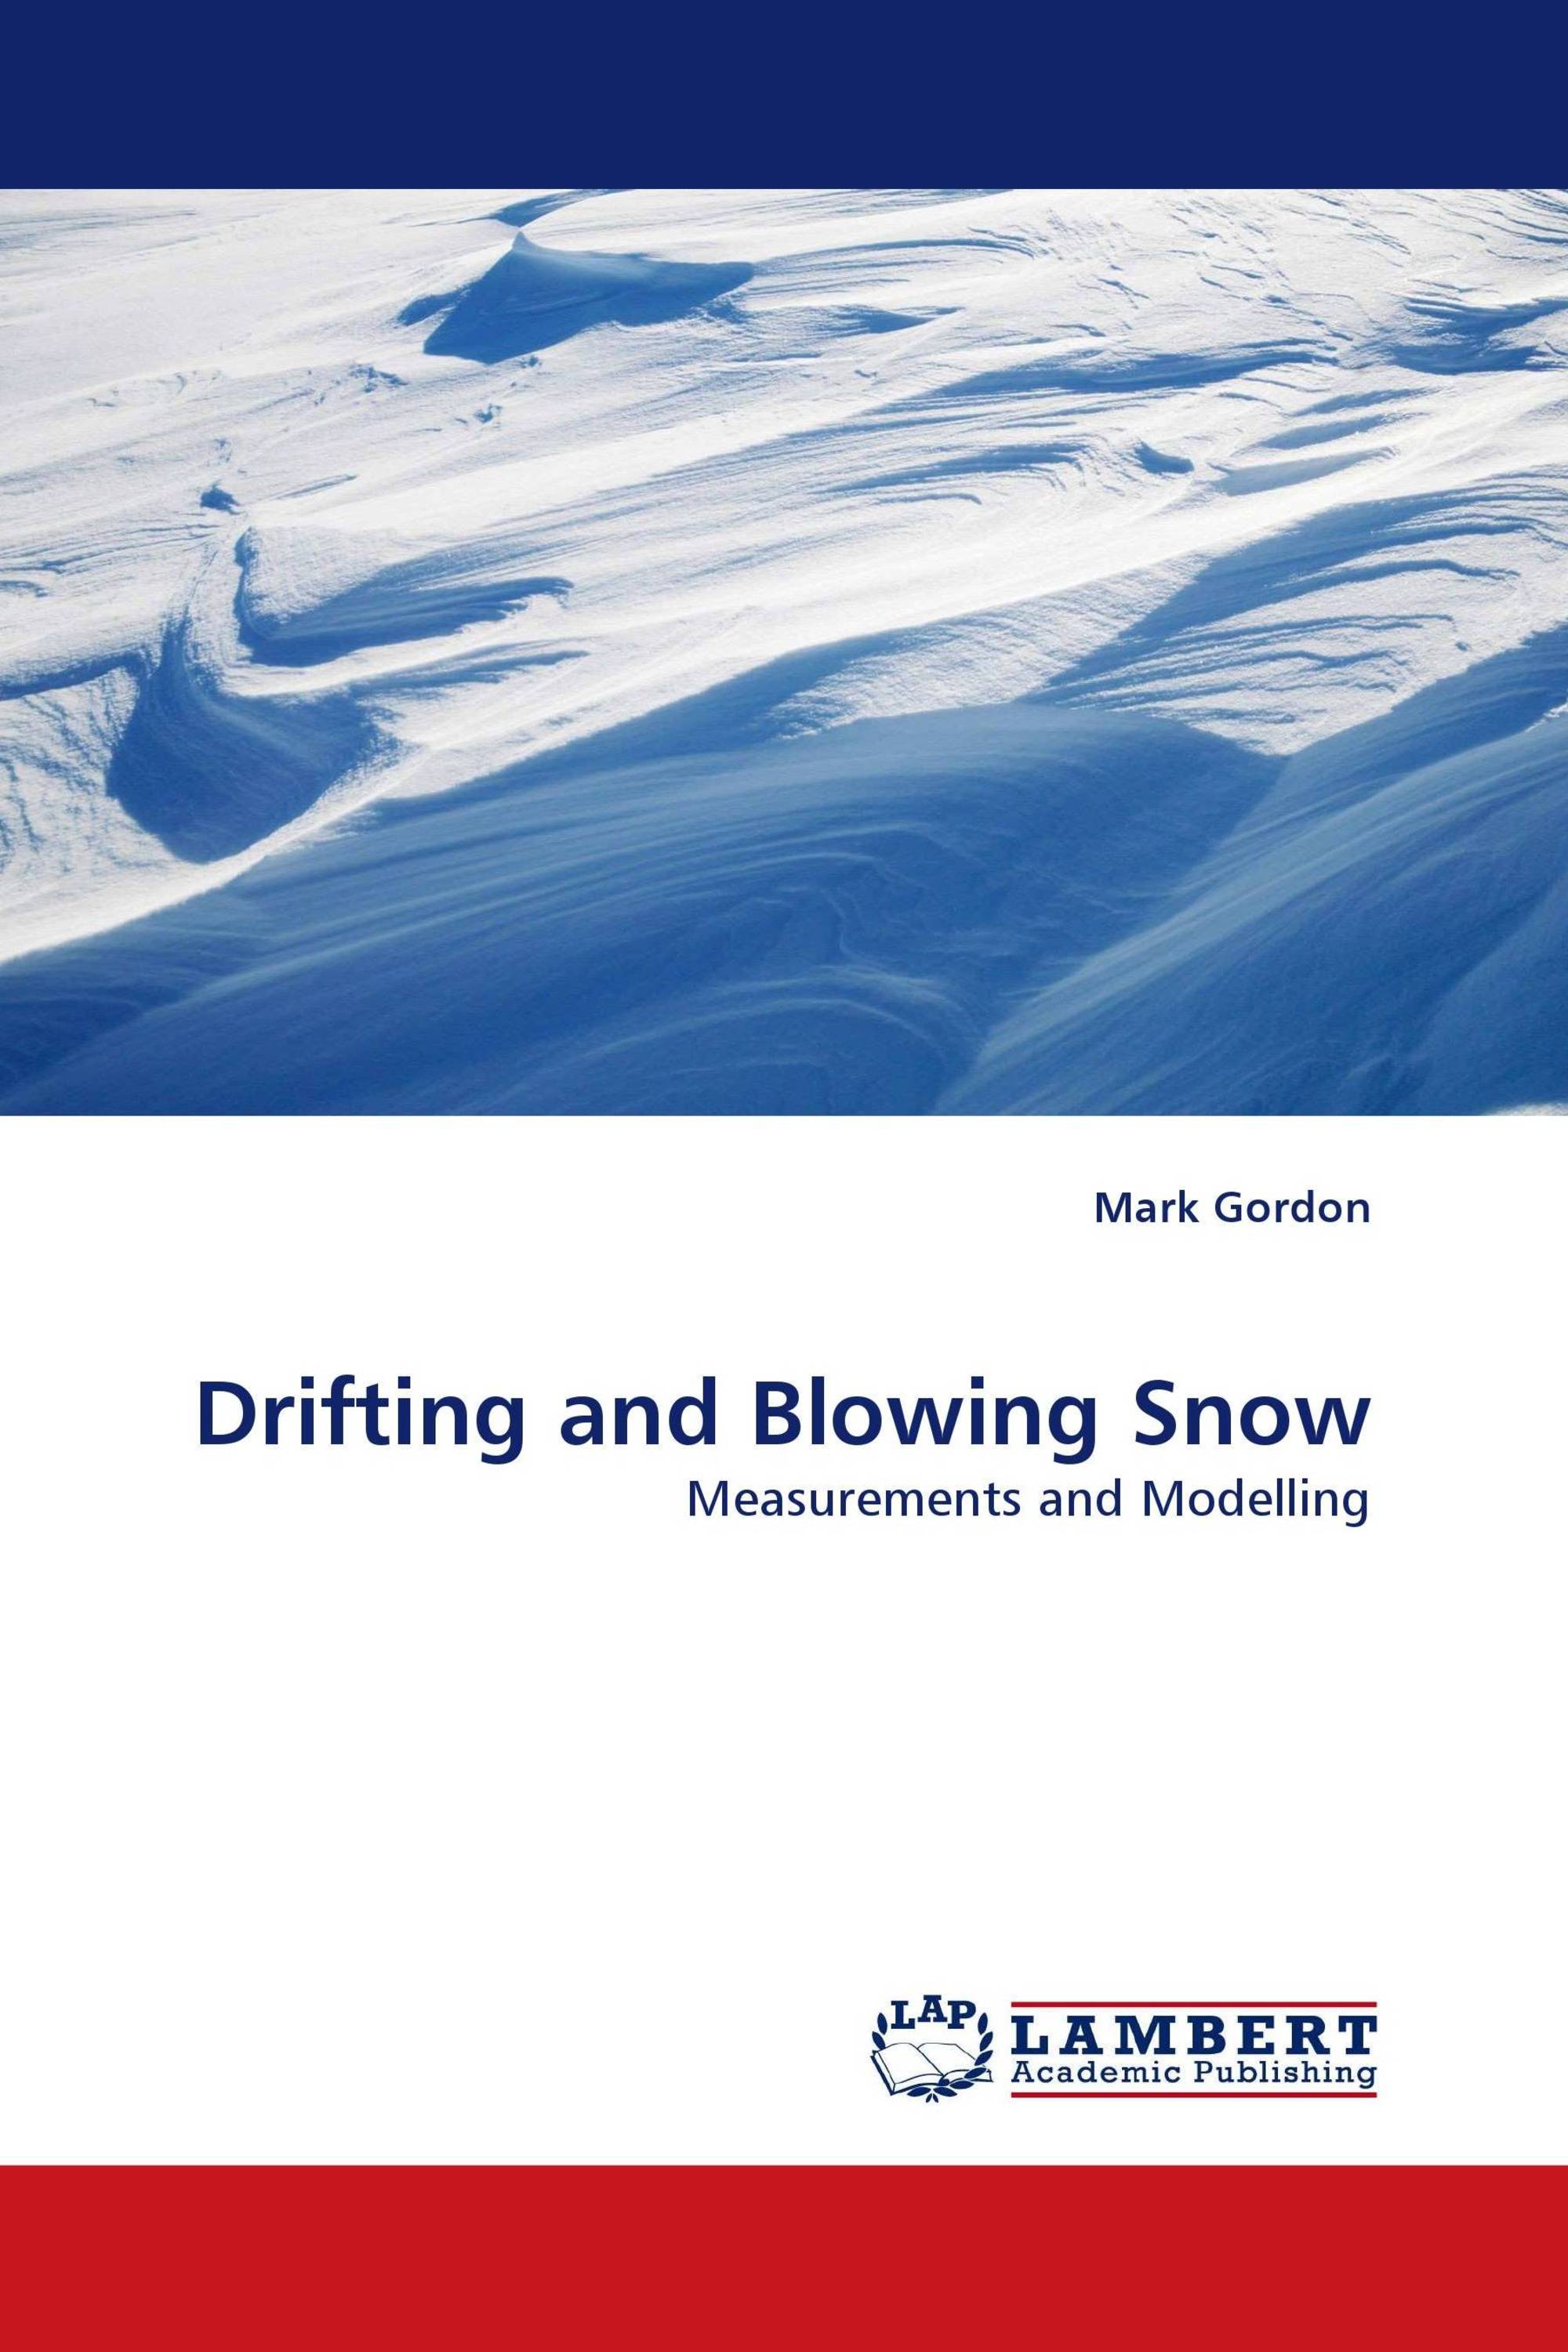 Drifting and Blowing Snow